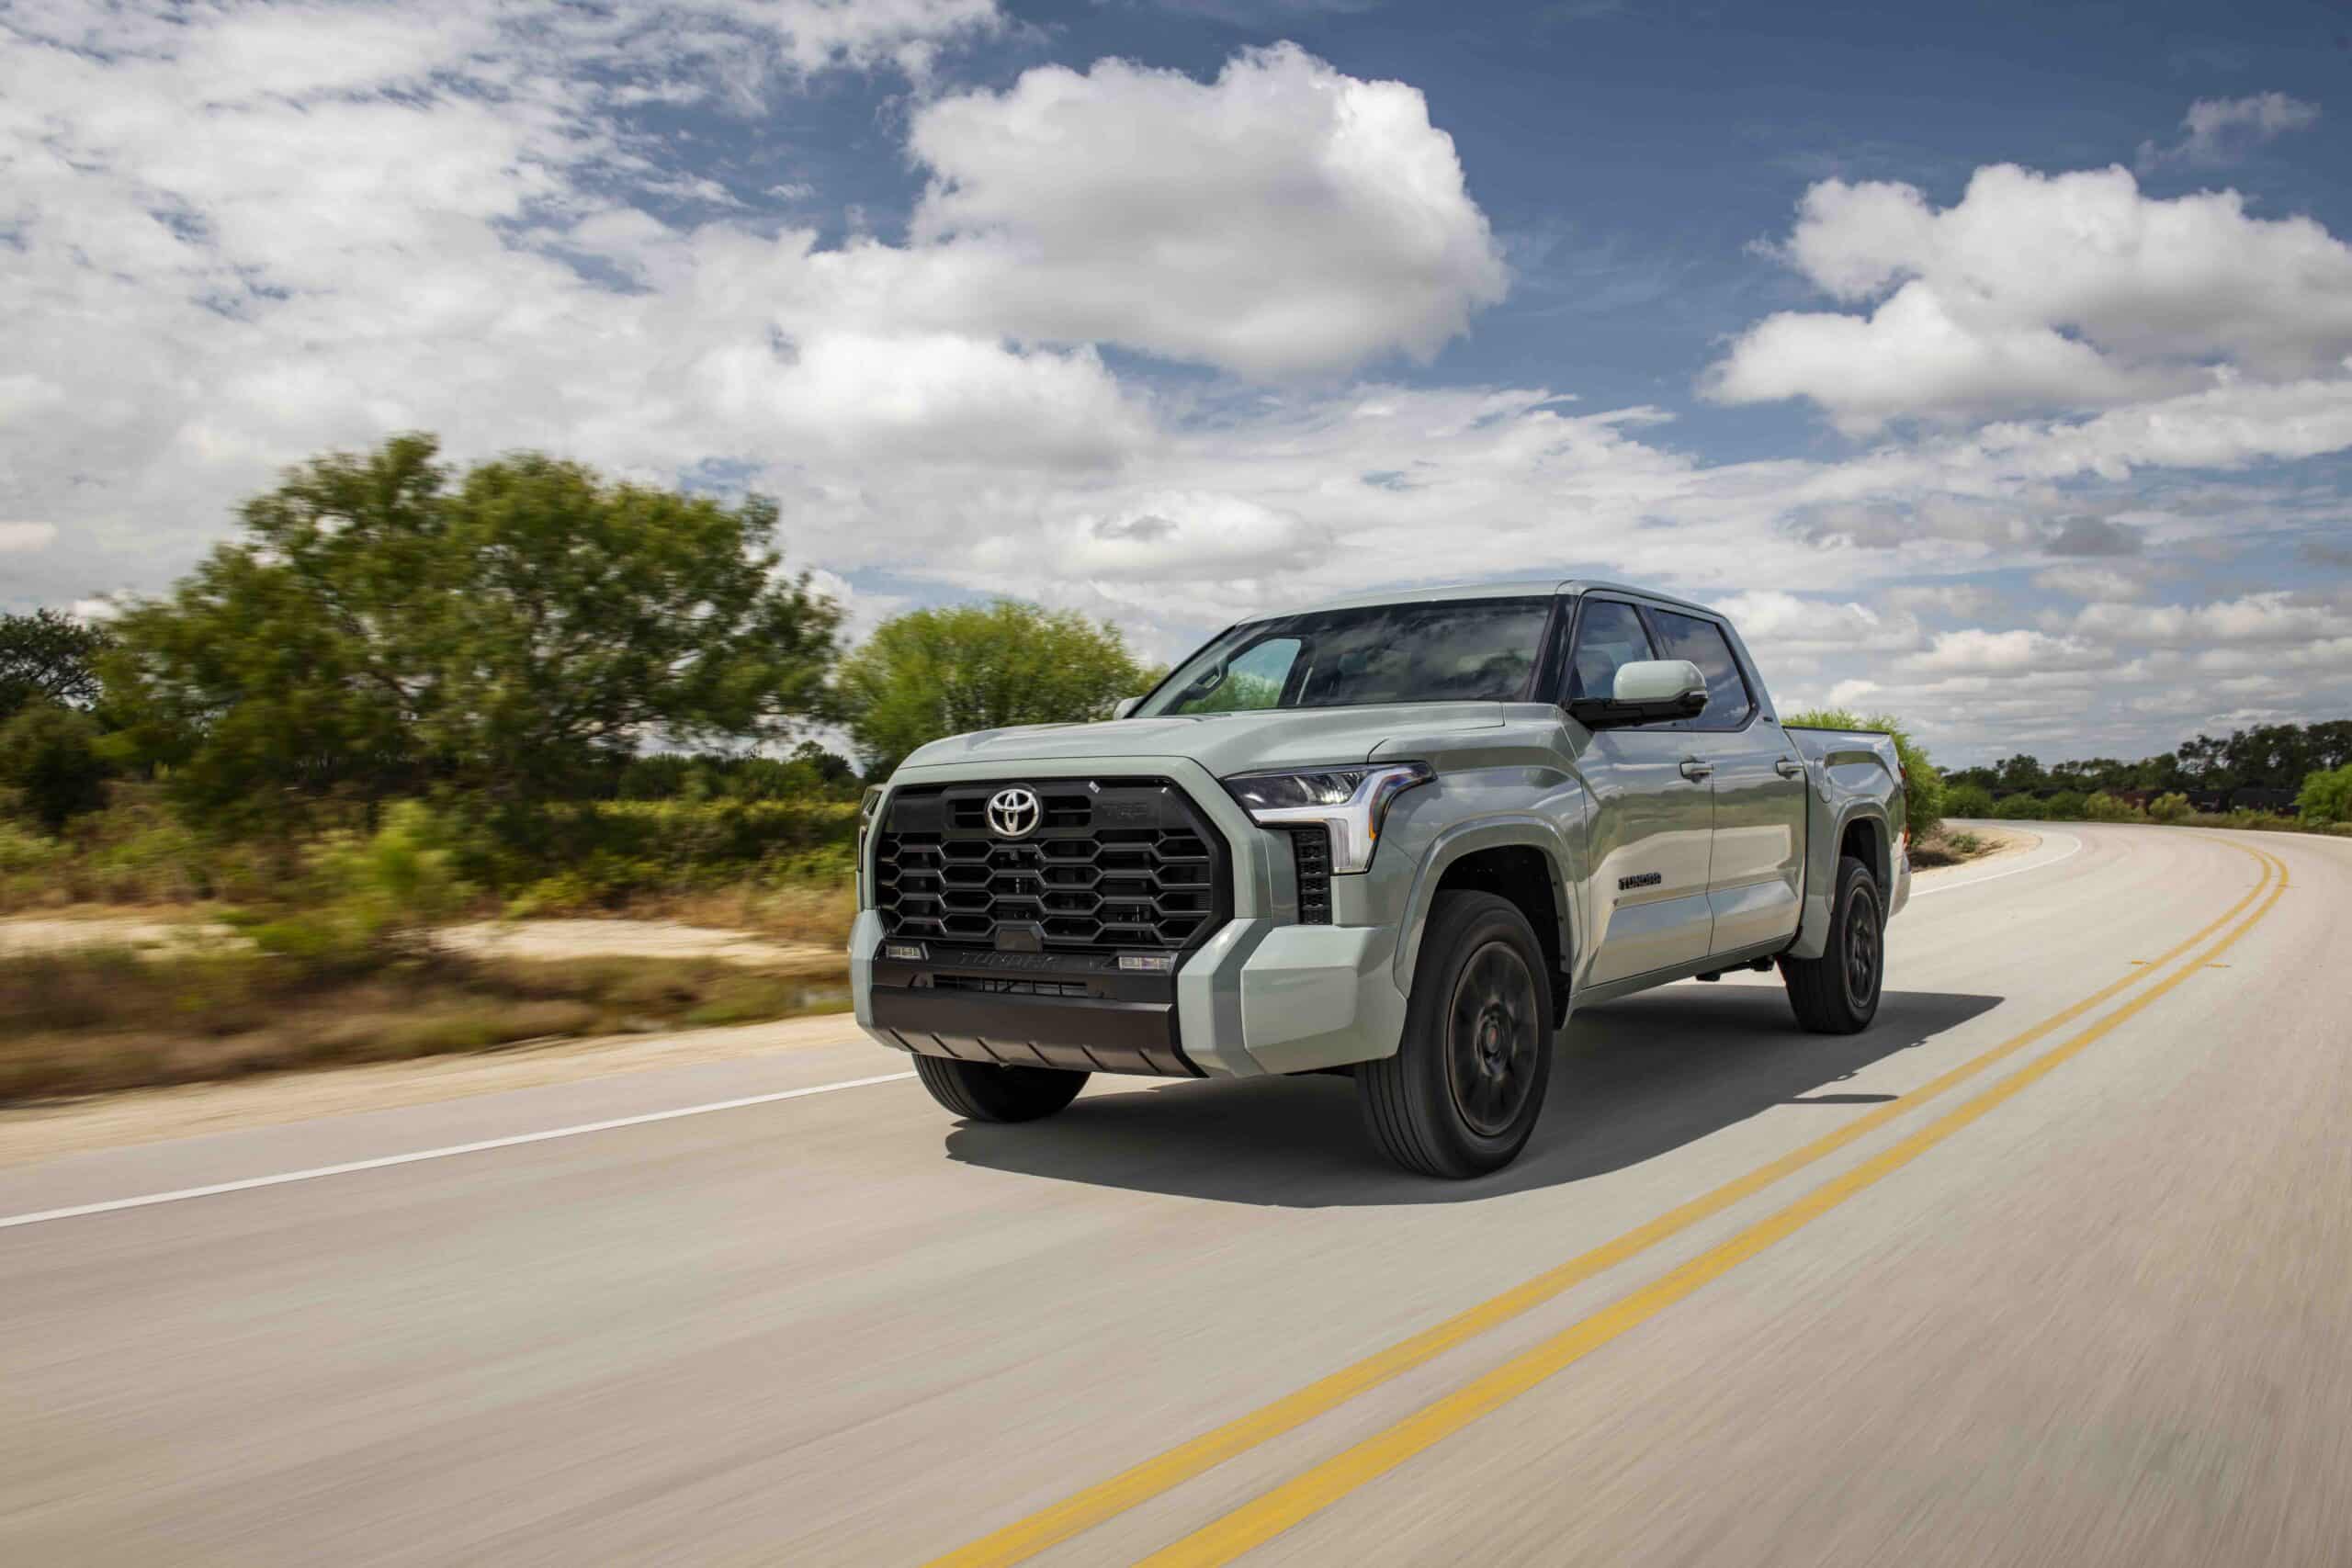 2022 Toyota Tundra received top IIHS safety award